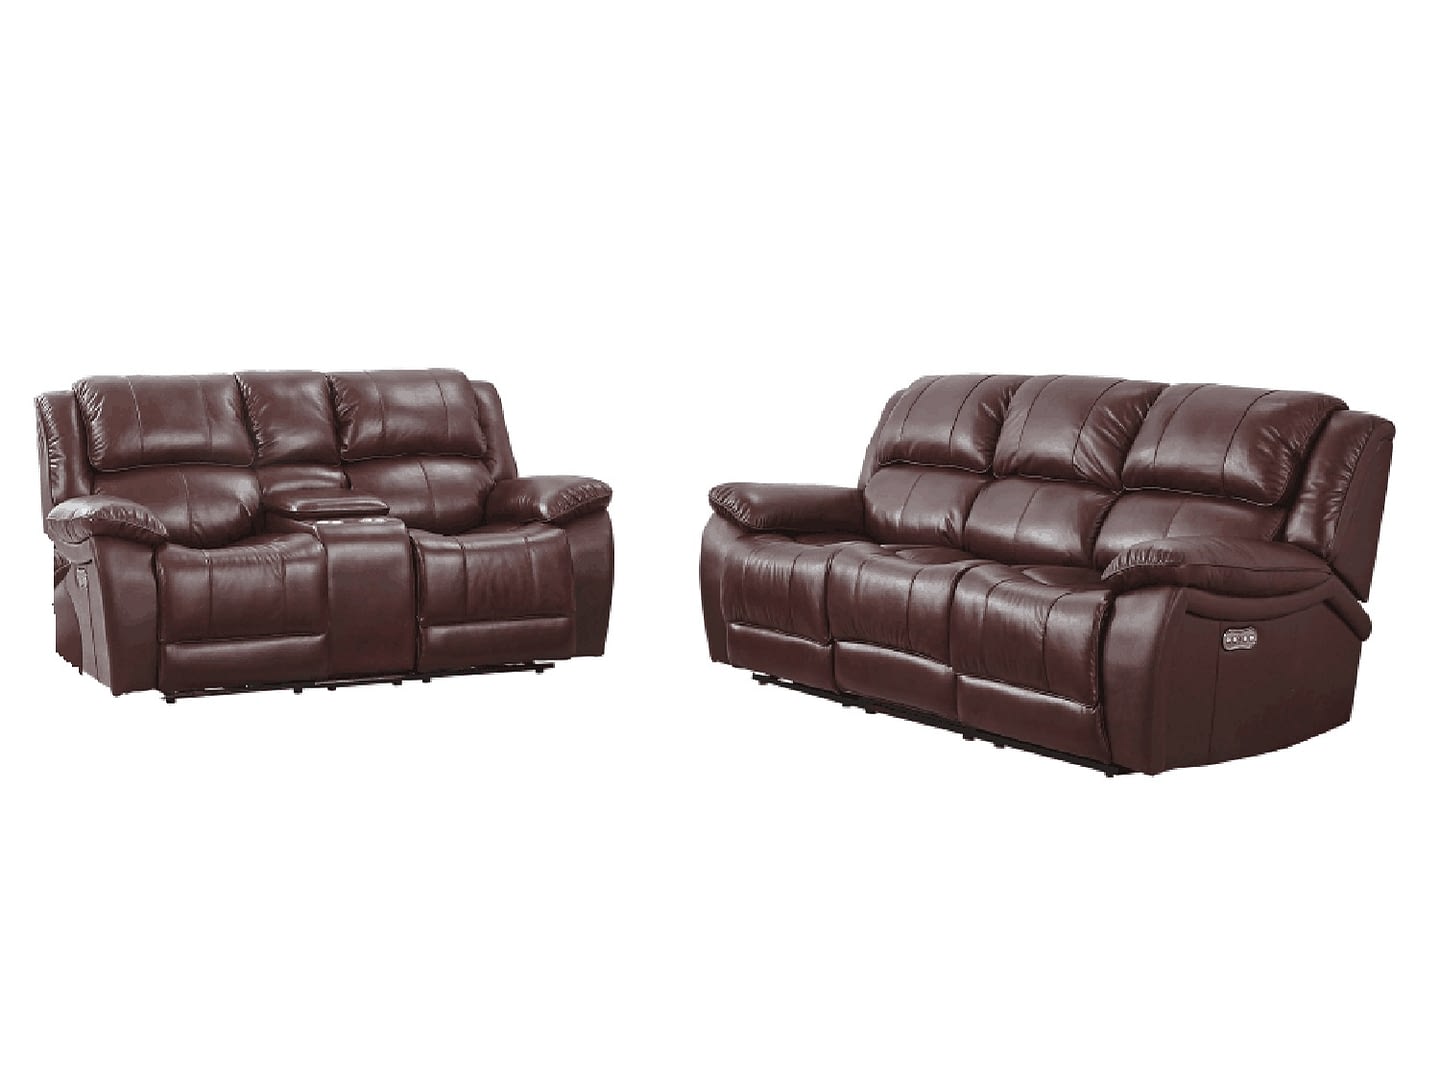 MONTCLARE Power Leather Reclining Sofa & Love-seat with Console